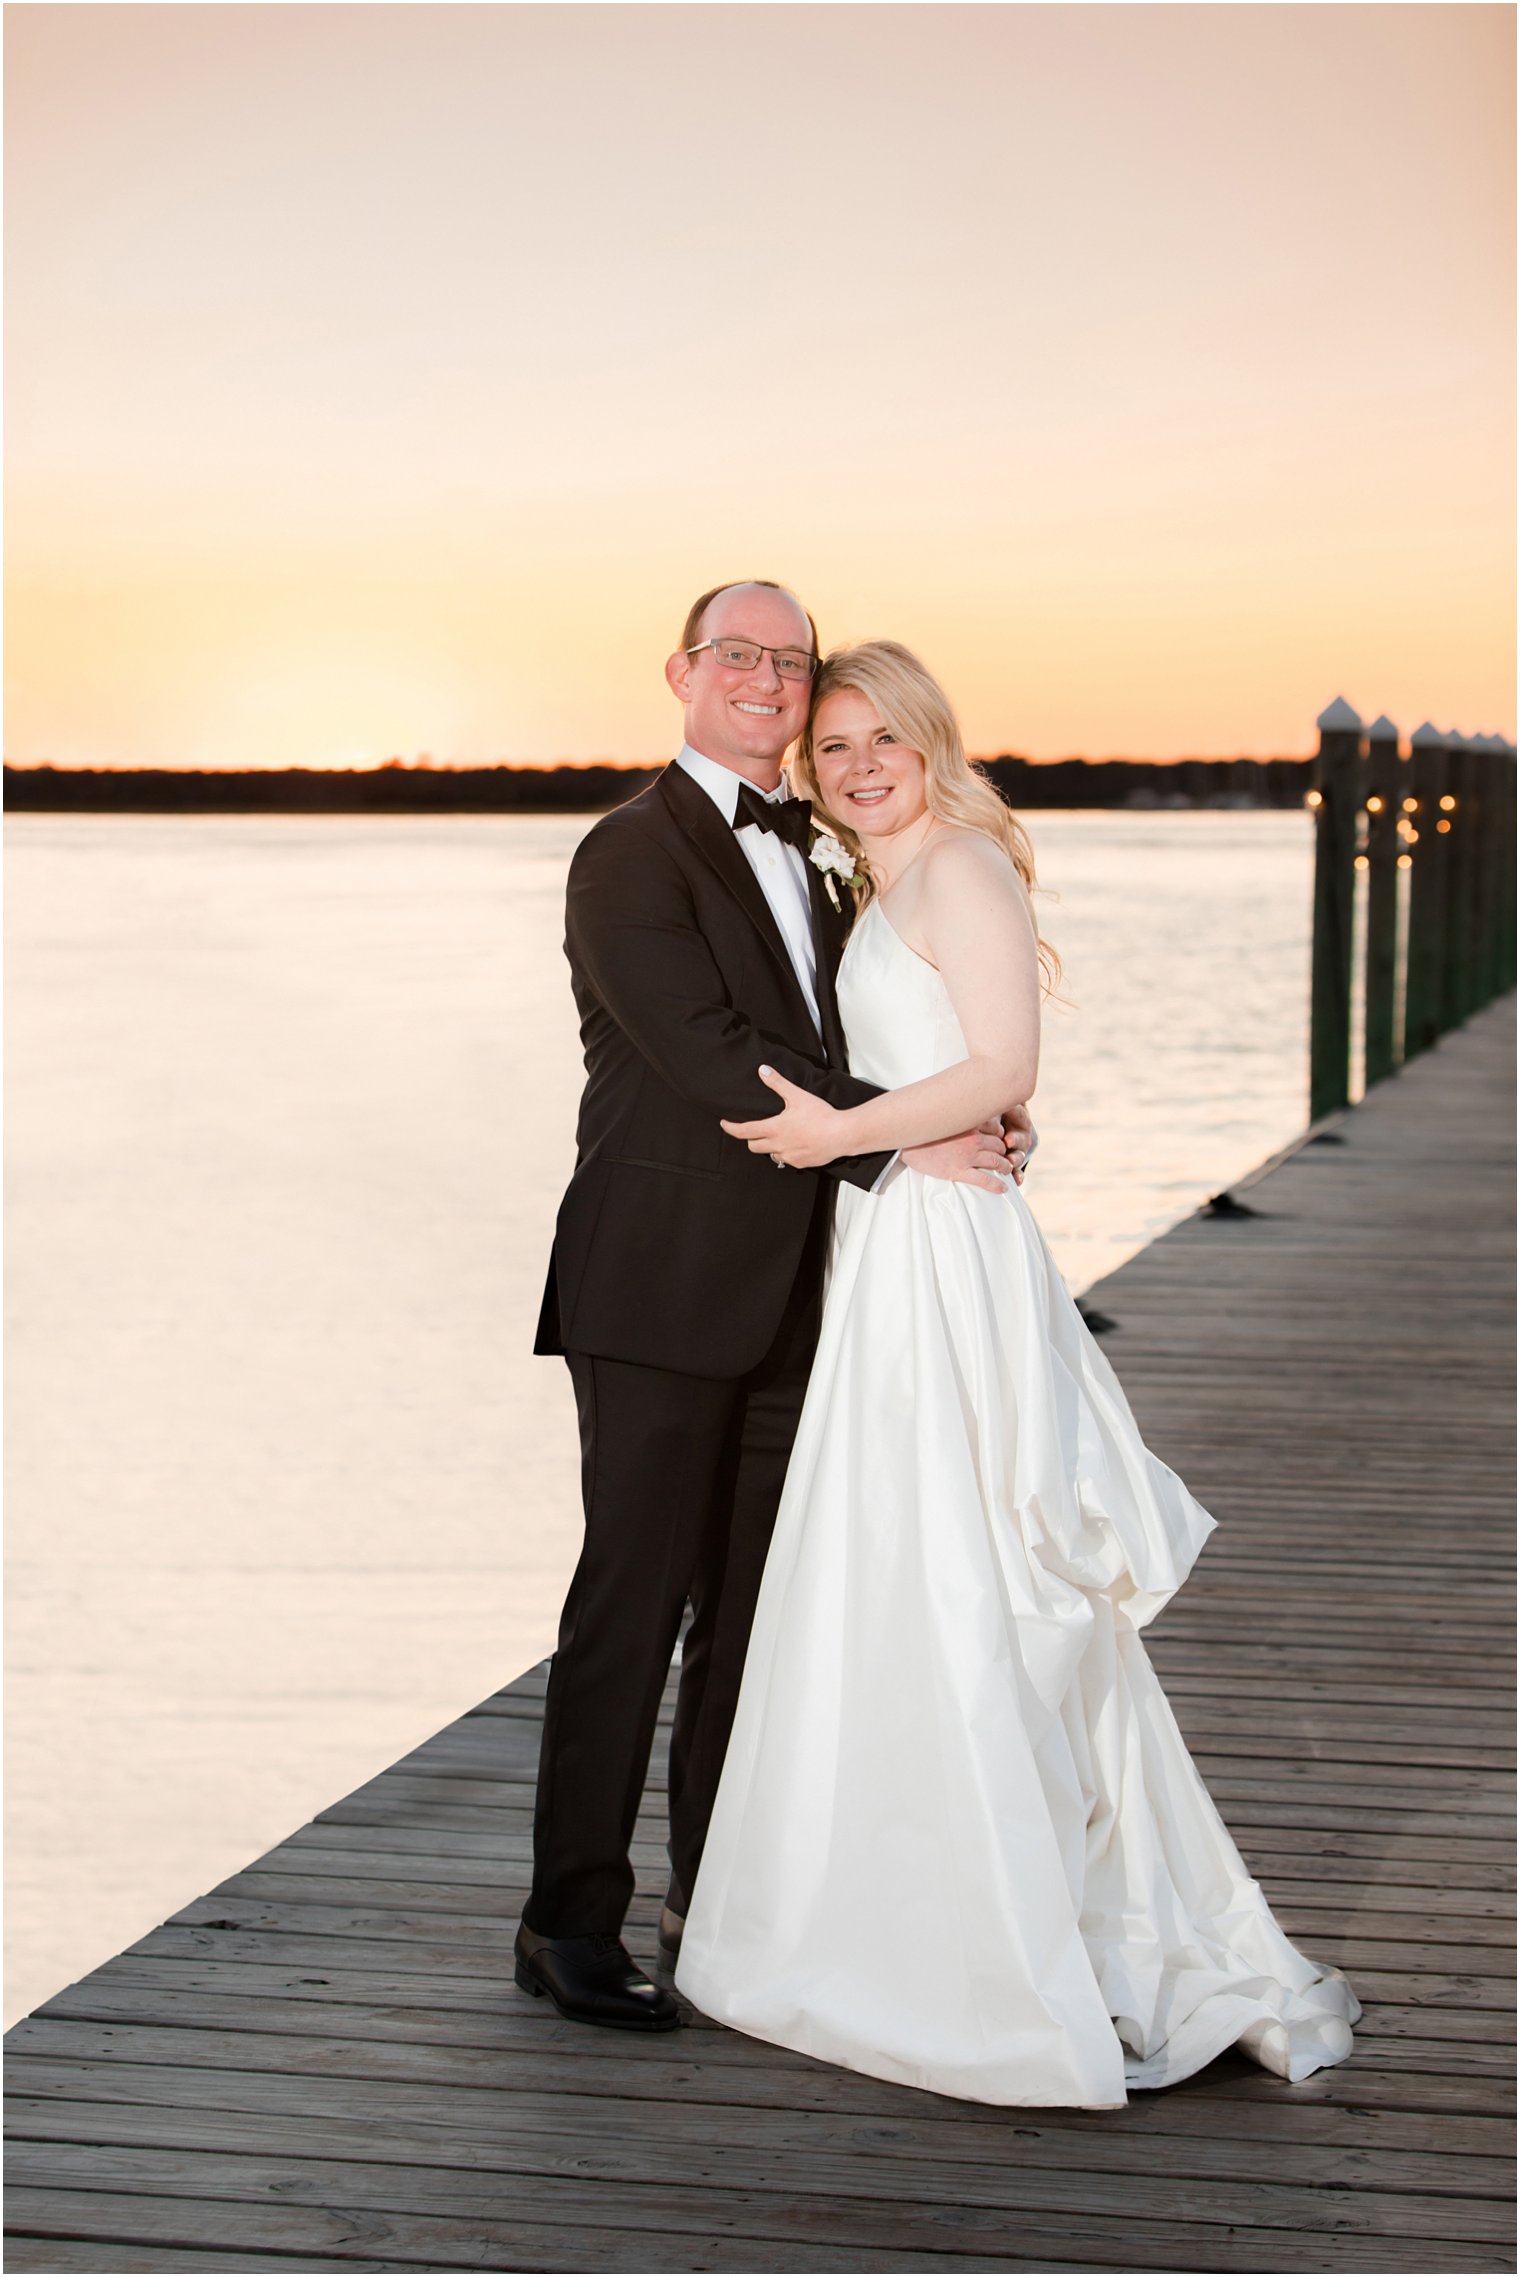 newlyweds pose at sunset by Barnegat Bay in Mantoloking